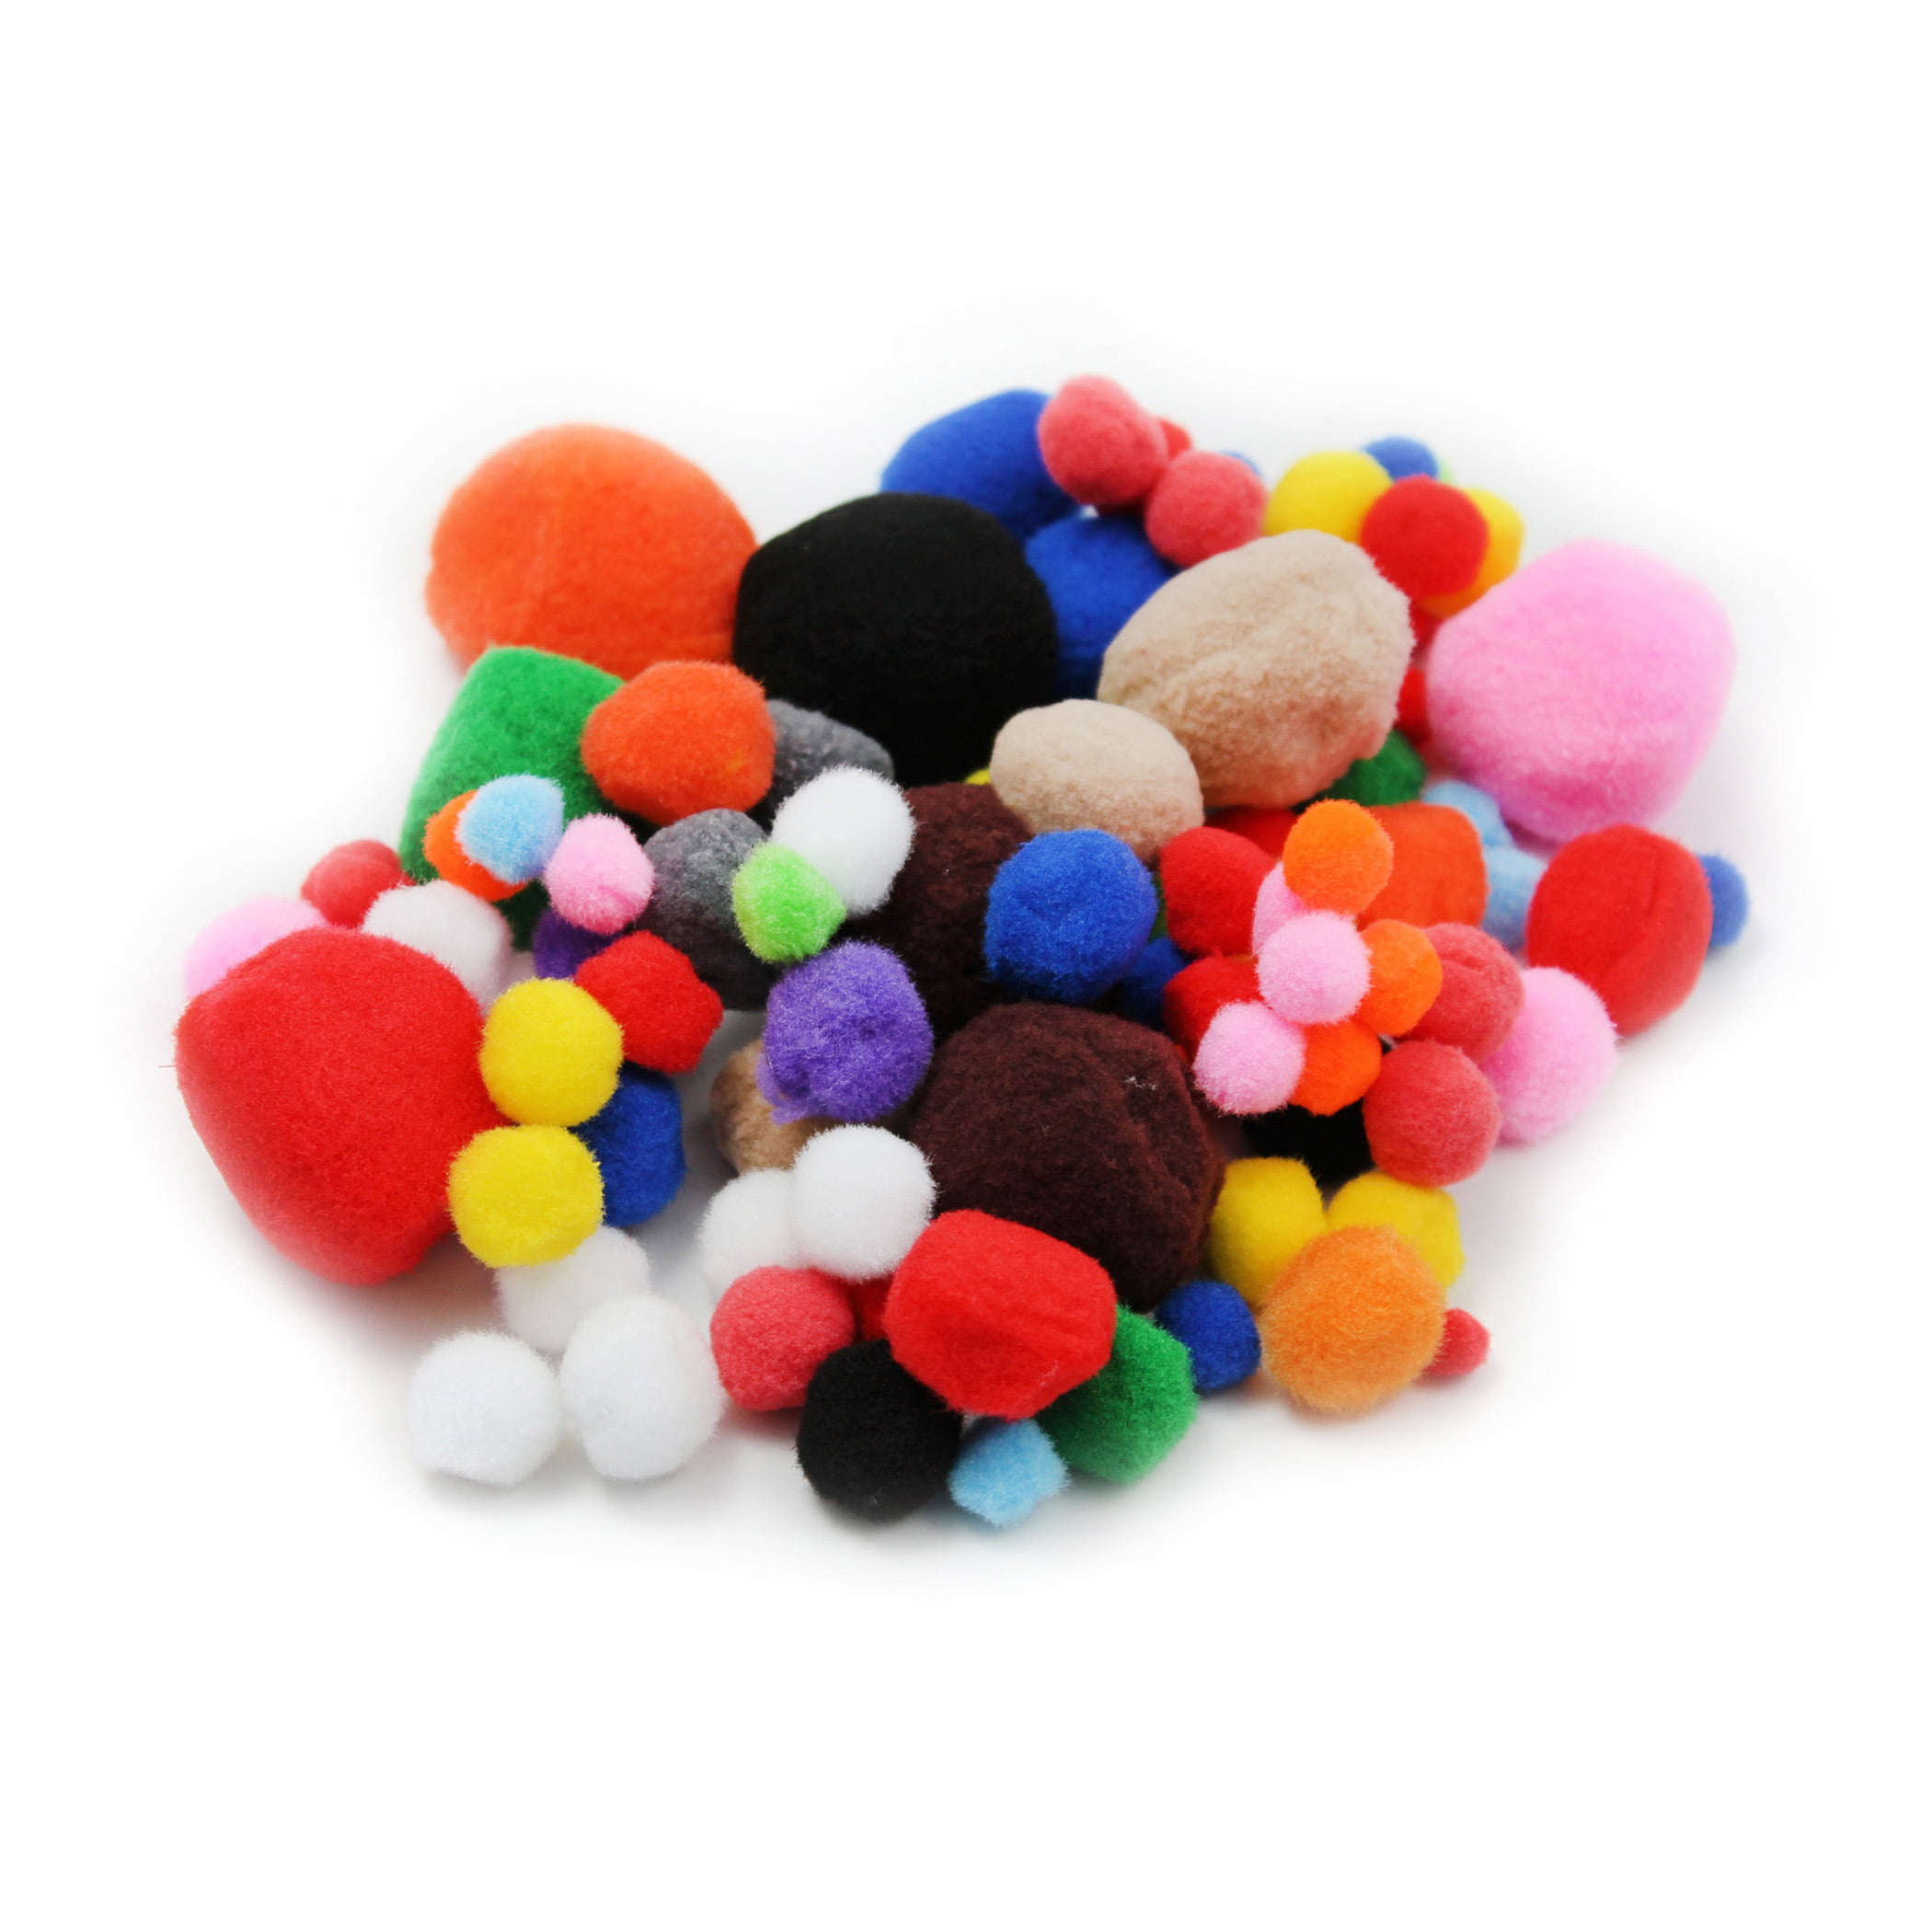 Adeweave 1000 Assorted Craft pom poms – Multicolor Bulk pom poms Arts and  Crafts, Pompoms for Crafts in Assorted Size- Soft and Fluffy Puff Balls